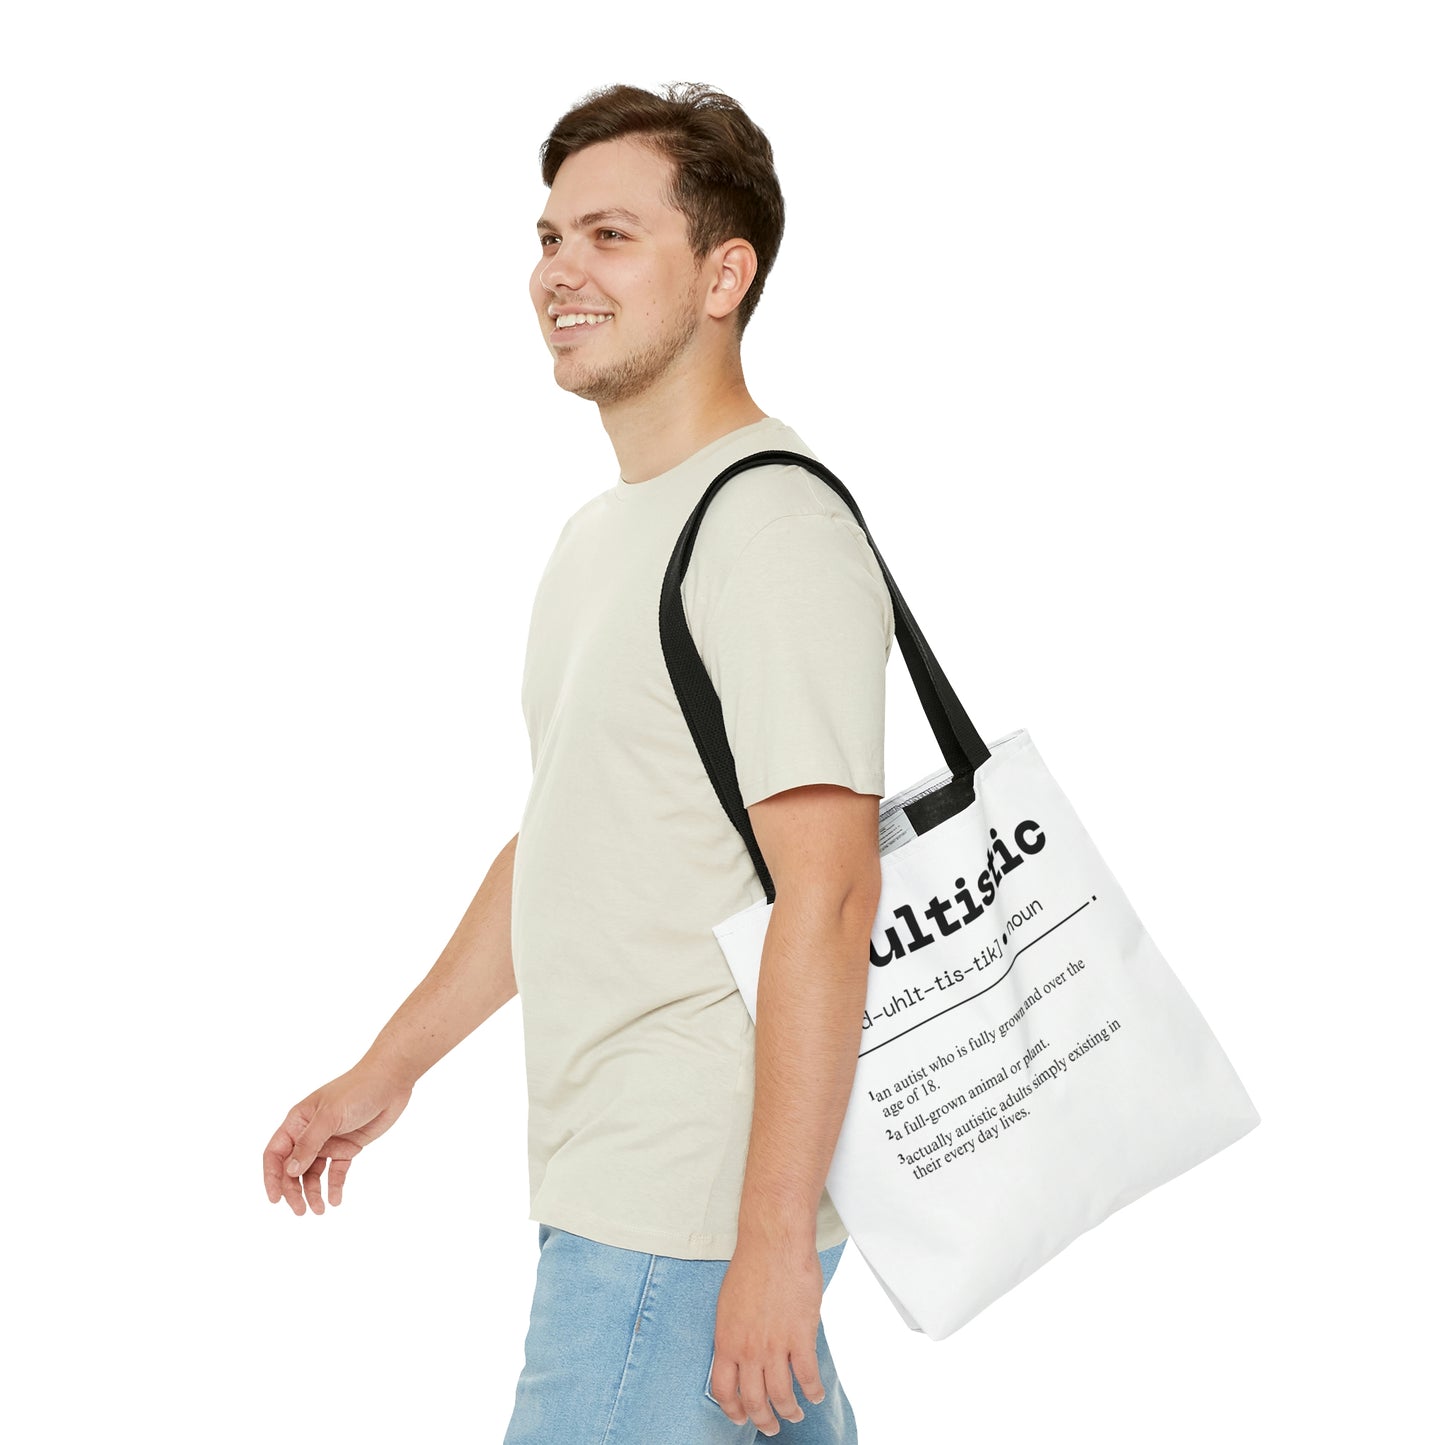 Adultistic [Redefined] Tote Bag in 3 sizes